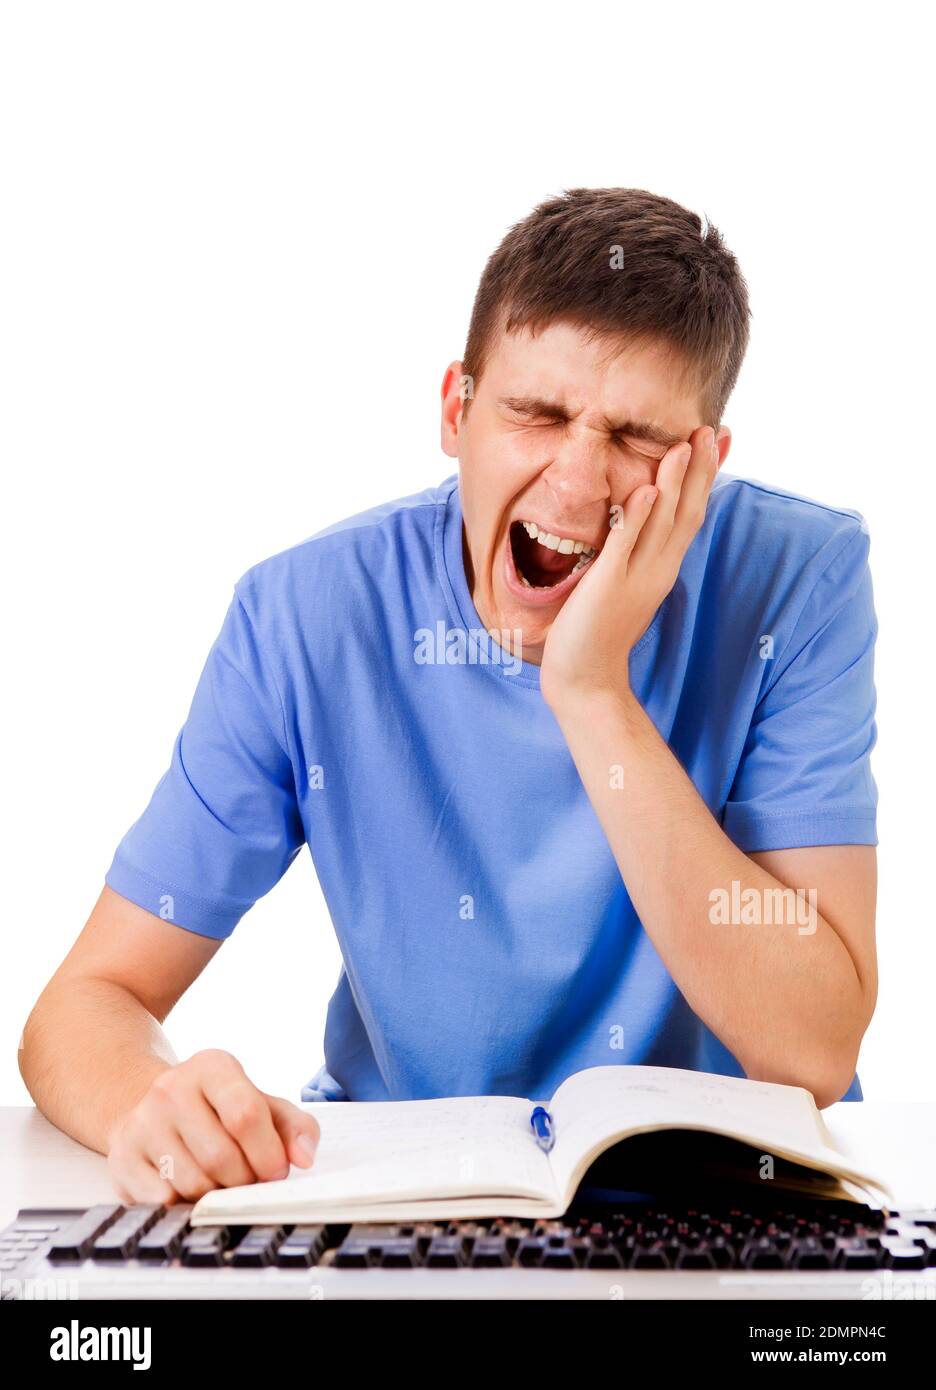 Tired Student Yawning on the School Desk Isolated on the White Background Stock Photo